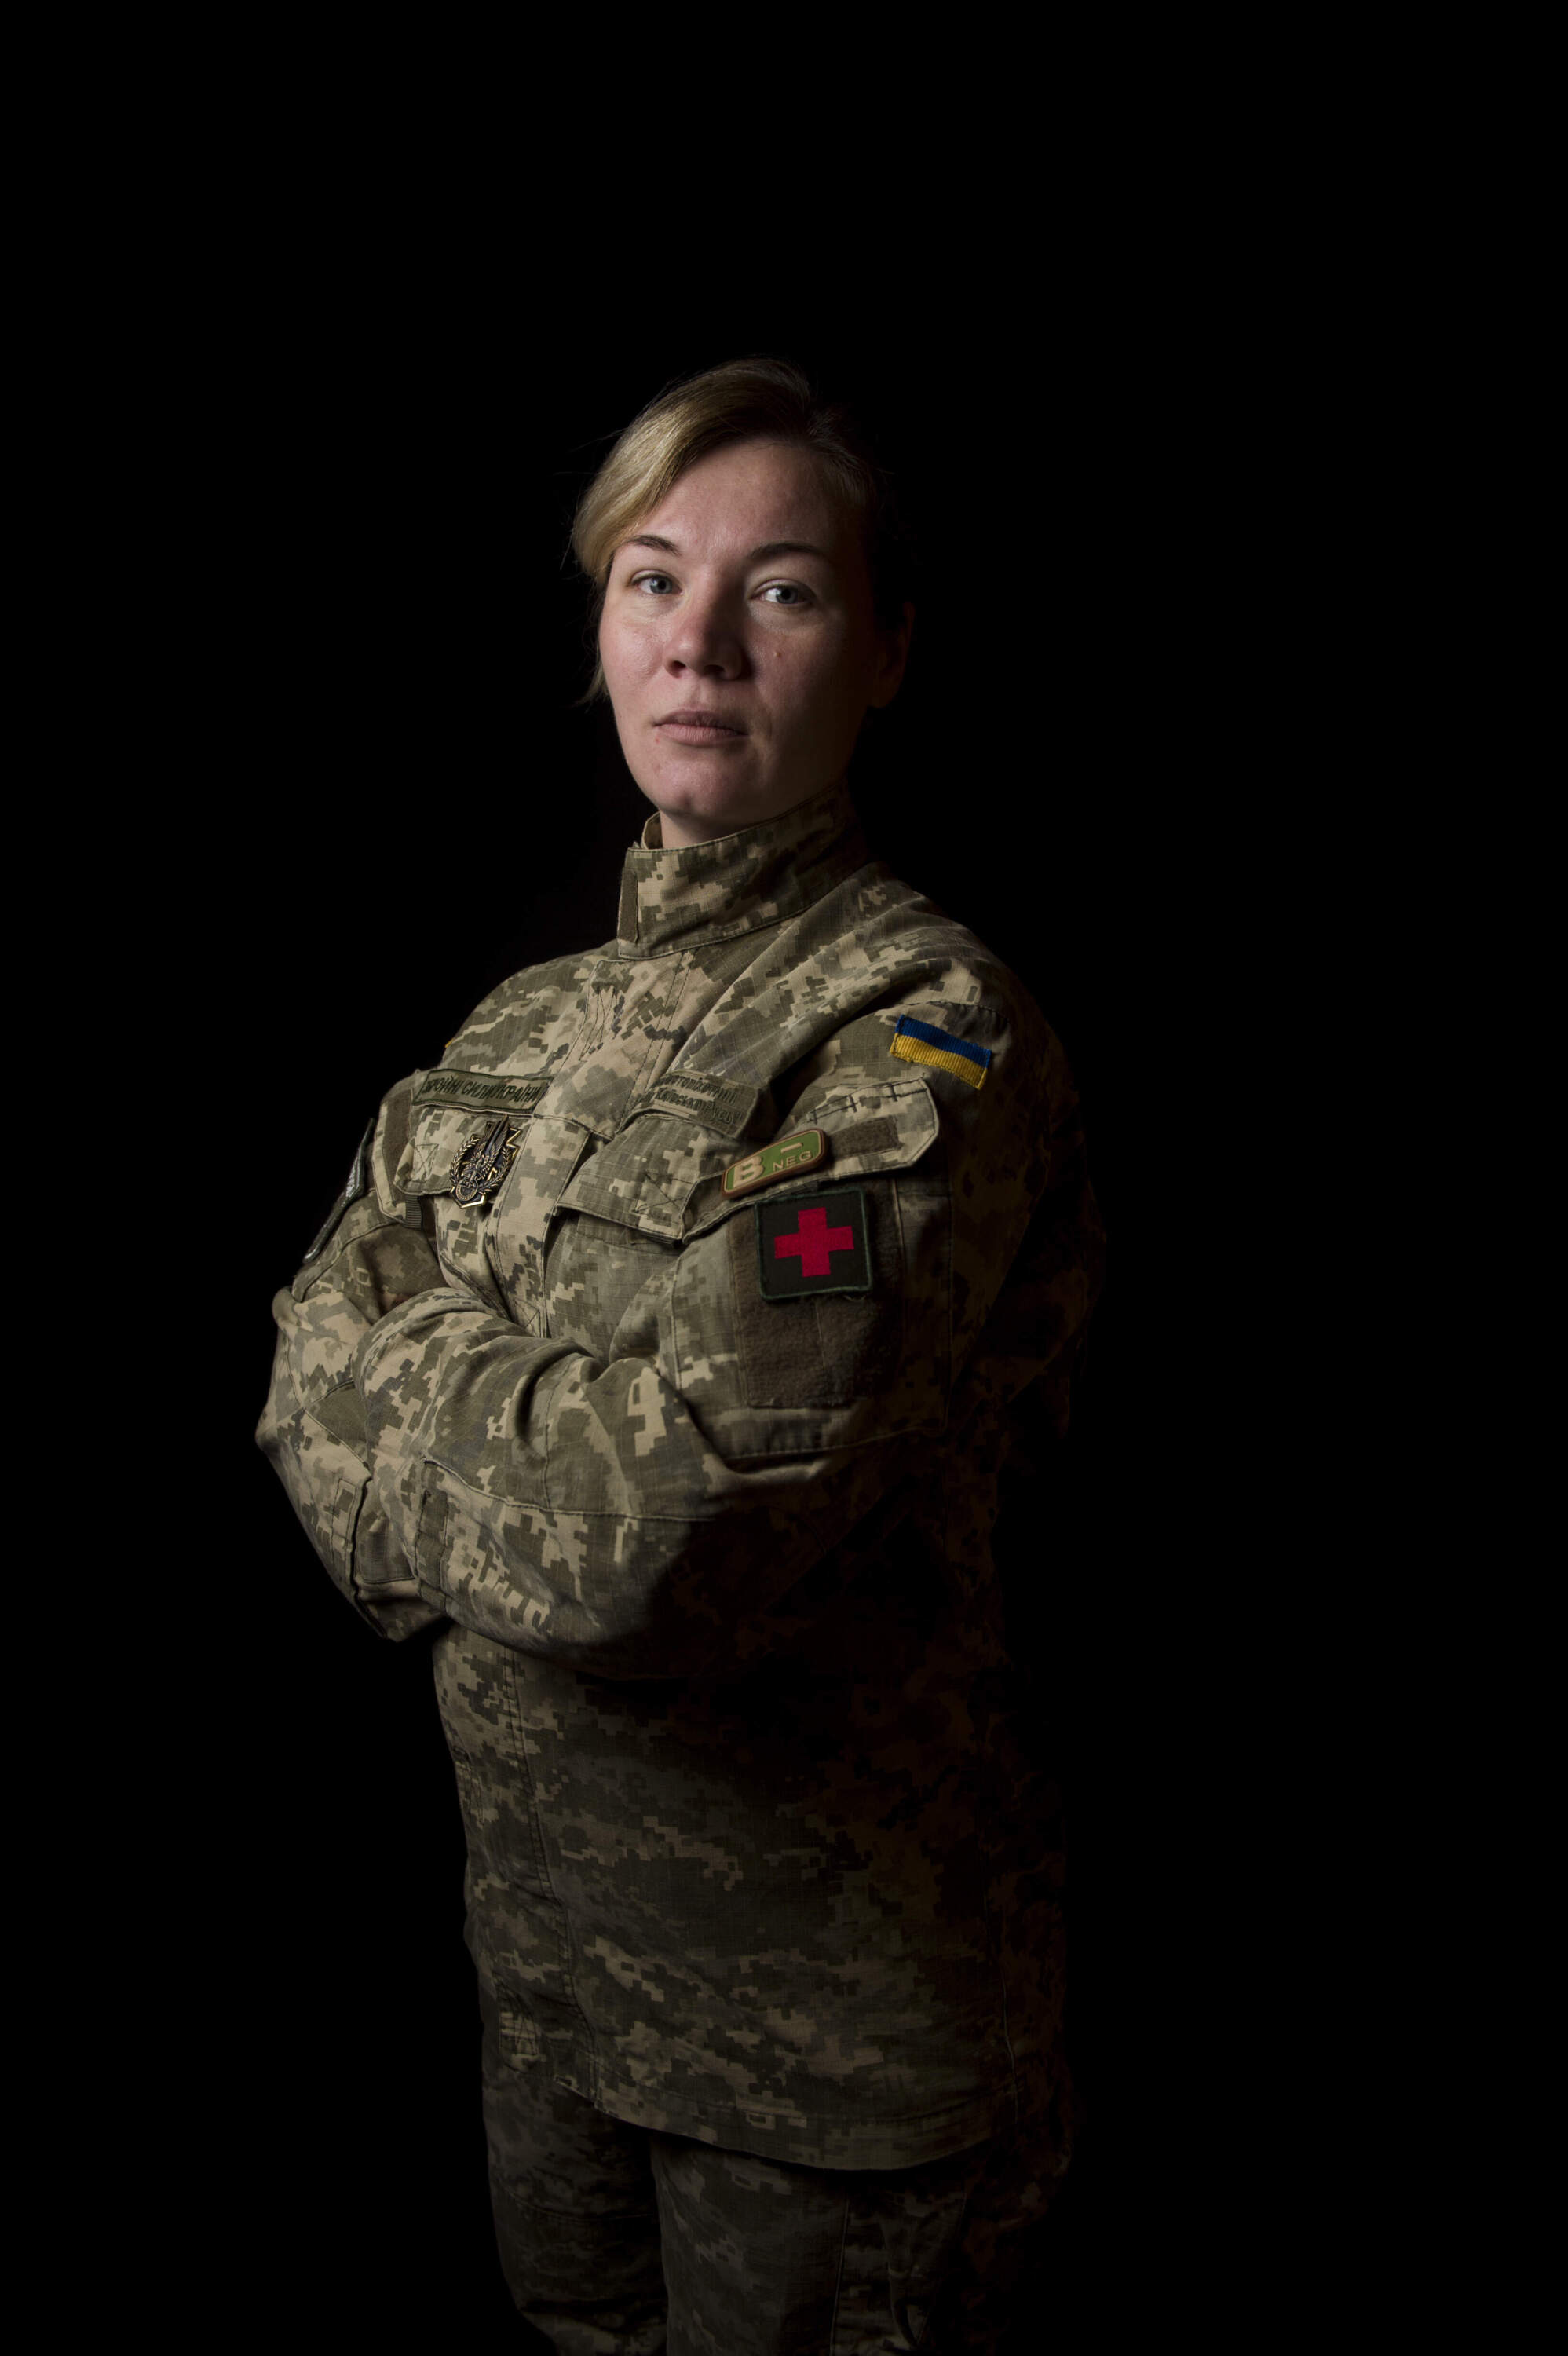 Portrait of Yevhenia “Eva” Yavchenko, Maidan revolutionary, a 2014 volunteer of the war in Eastern Ukraine. From Kyiv, Yevhenia ran a nail salon business before she became an active participant in the Euromaidan revolution. After the annexation of Crimea in 2014, she joined the 25th Battalion Kyivska Rus, a volunteer battalion created by her husband, working as a paramedic on the frontline during some of the most intense fighting of the war, including the battle of Debaltseve. She continued her service to the war collecting and delivering supplies to soldiers and children/schools in the conflict area and facilitating medical treatment for the children in the conflict zone, bringing them to camps outside the war where they are treated for medical injuries and receive psychological support. Yevhenia left shortly before the full-scale invasion in 2022 to protect her children. Photograph taken in Kyiv, Ukraine on October 5, 2018. (J.T. Blatty/Redux)